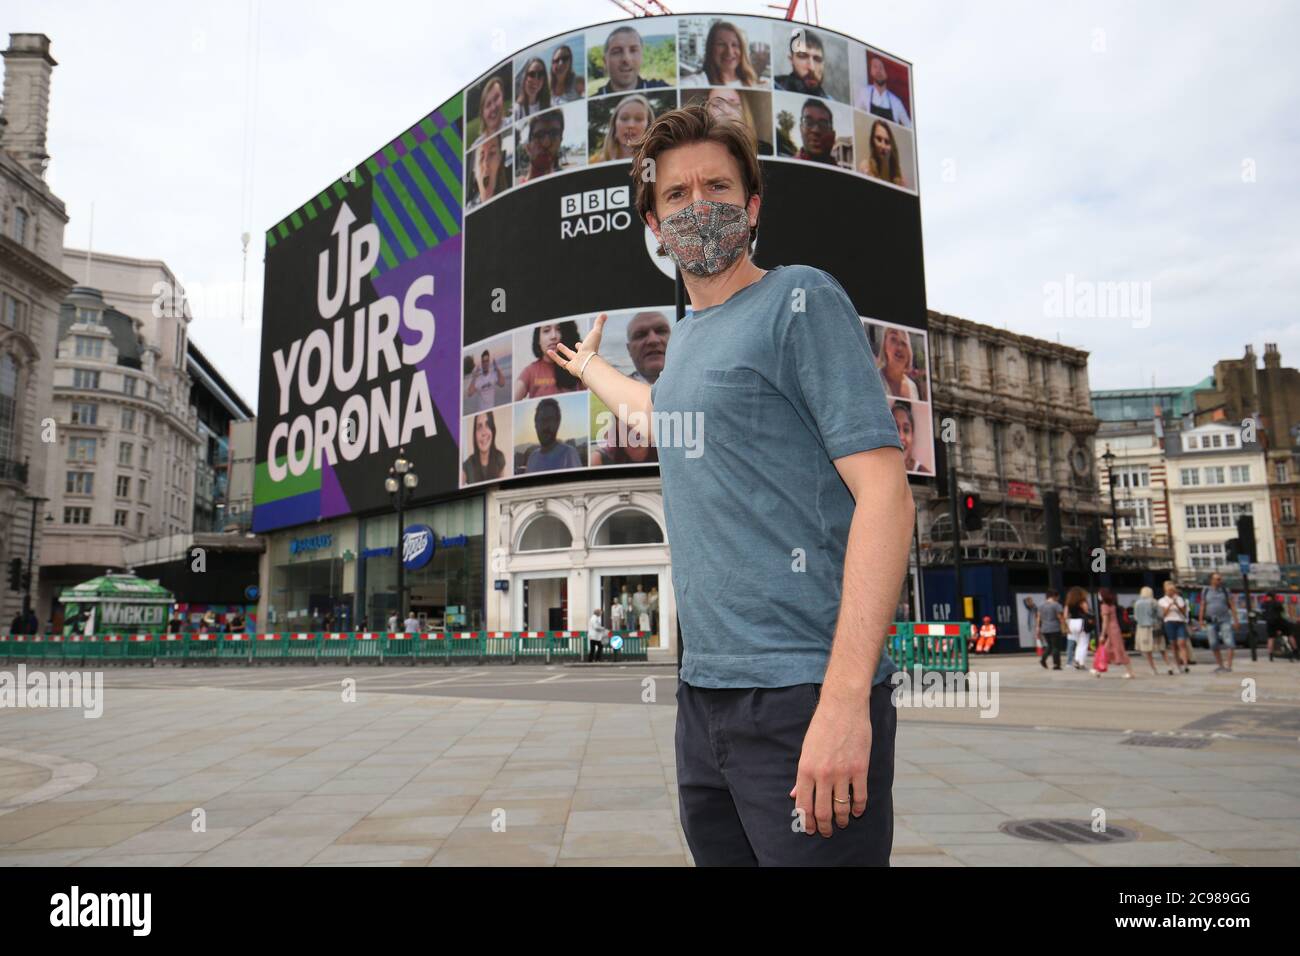 BBC Radio 1 DJ Greg James at Piccadilly Circus, London, as the Radio 1 'Up Yours Corona' campaign is displayed on the Piccadilly Lights screen. The 10 minute long display features one person from every country in the world. Stock Photo